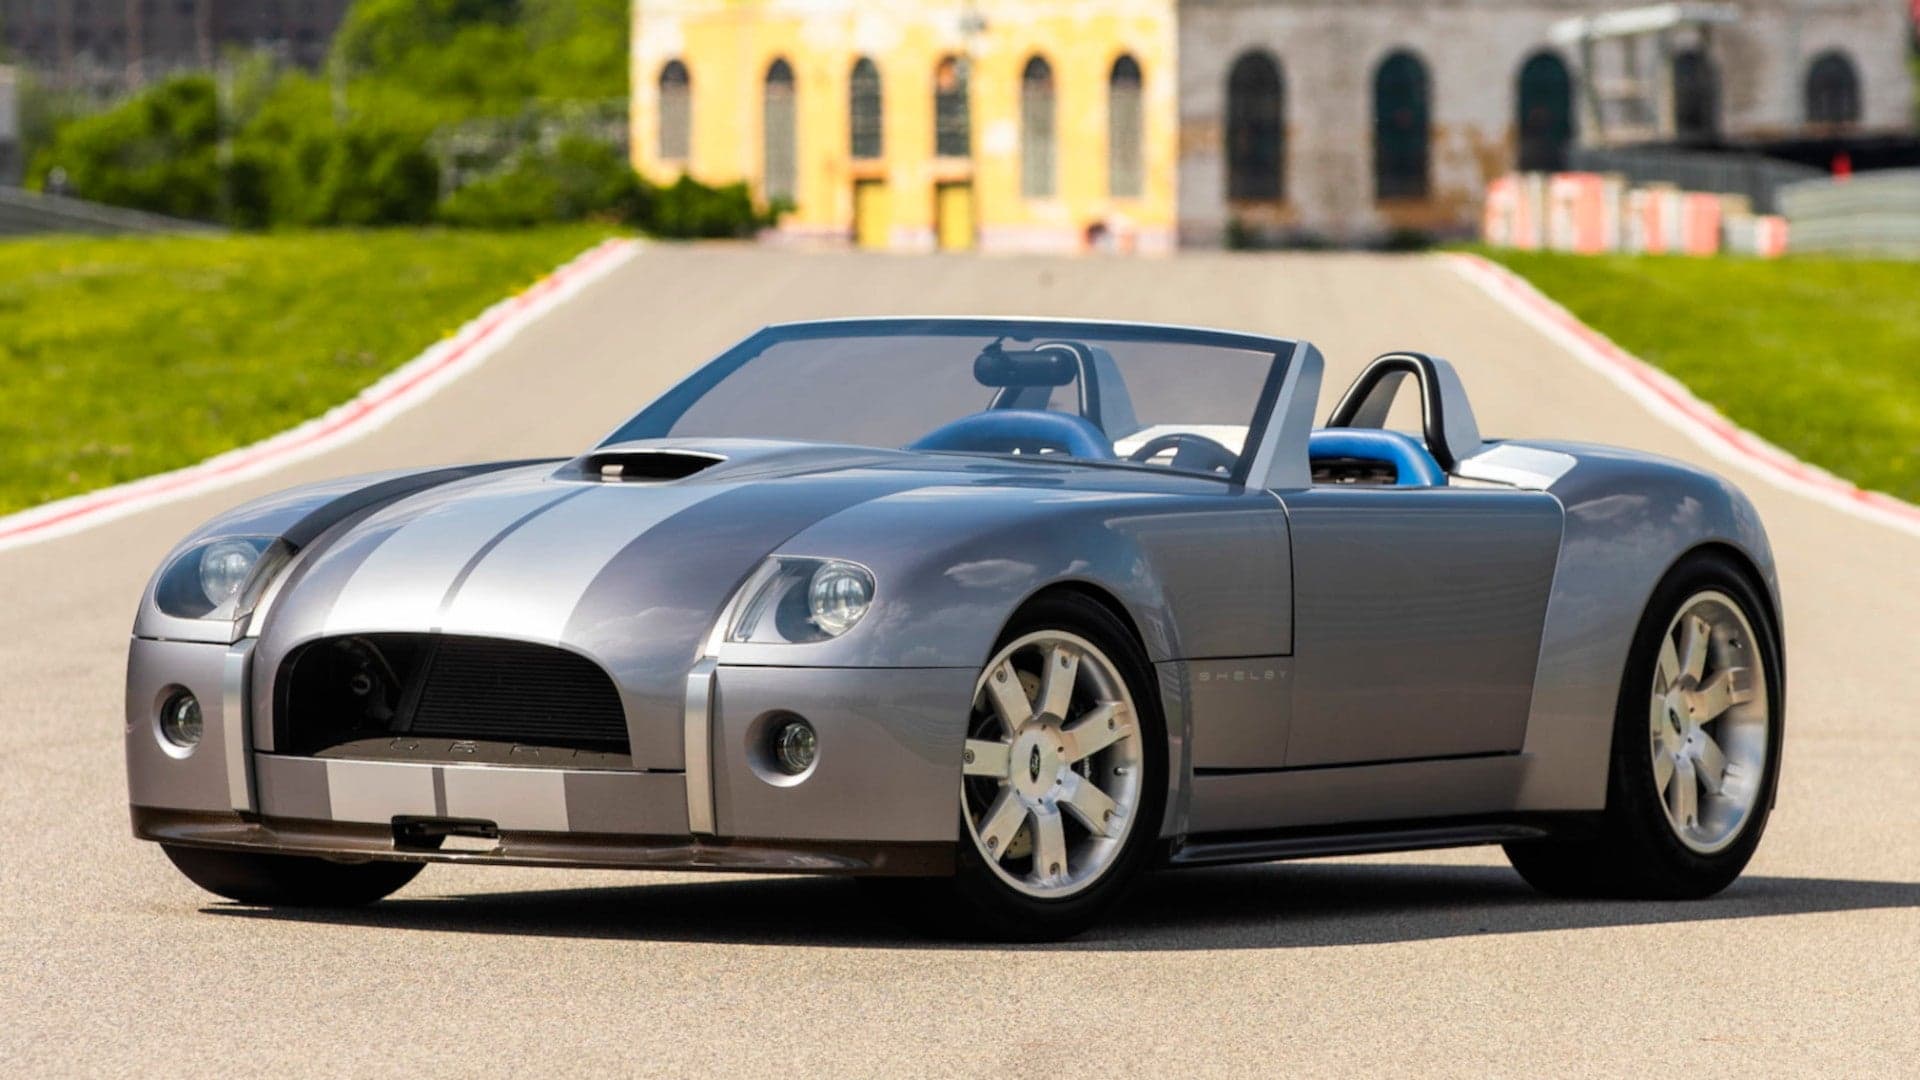 Ford’s V10 Shelby Cobra Concept Heading to Auction